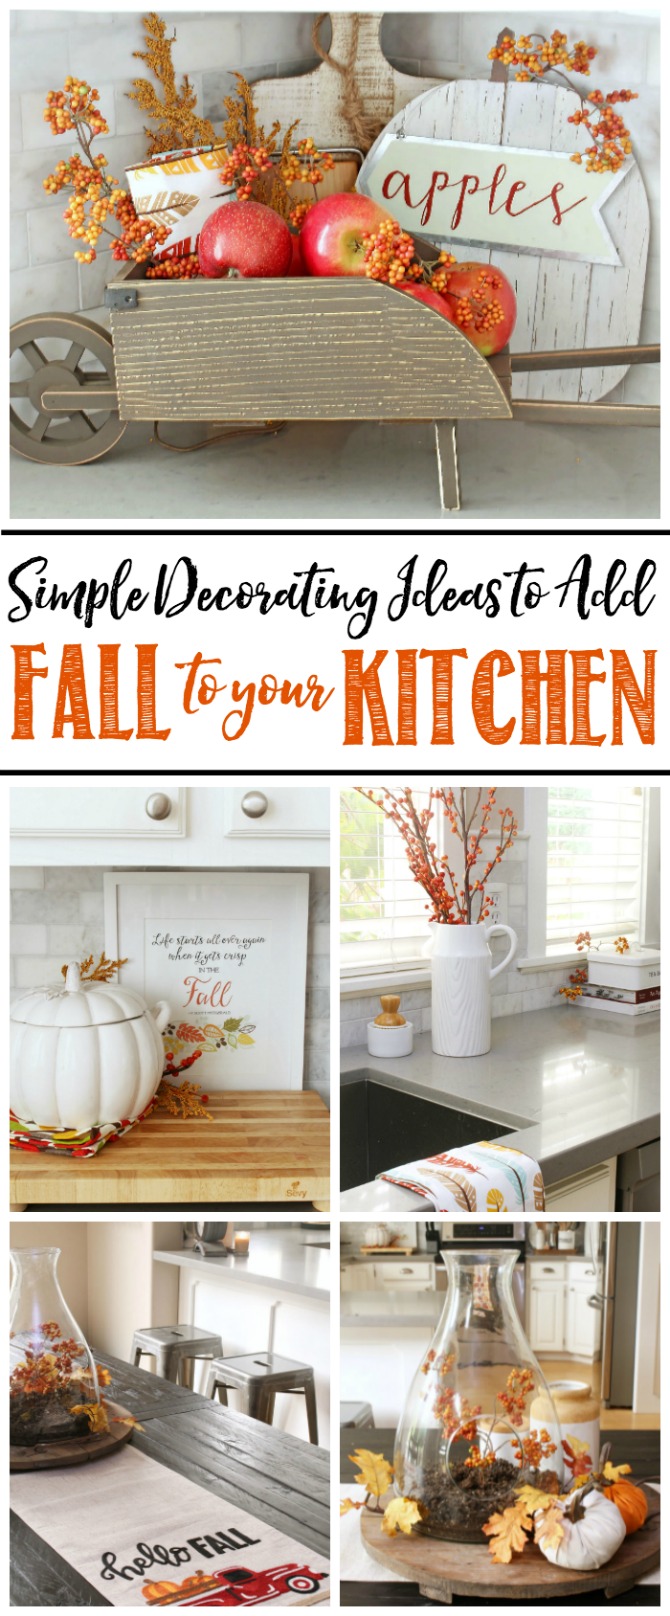 Easy fall kitchen decorating ideas. Simple ways to add some fall to your kitchen decor!